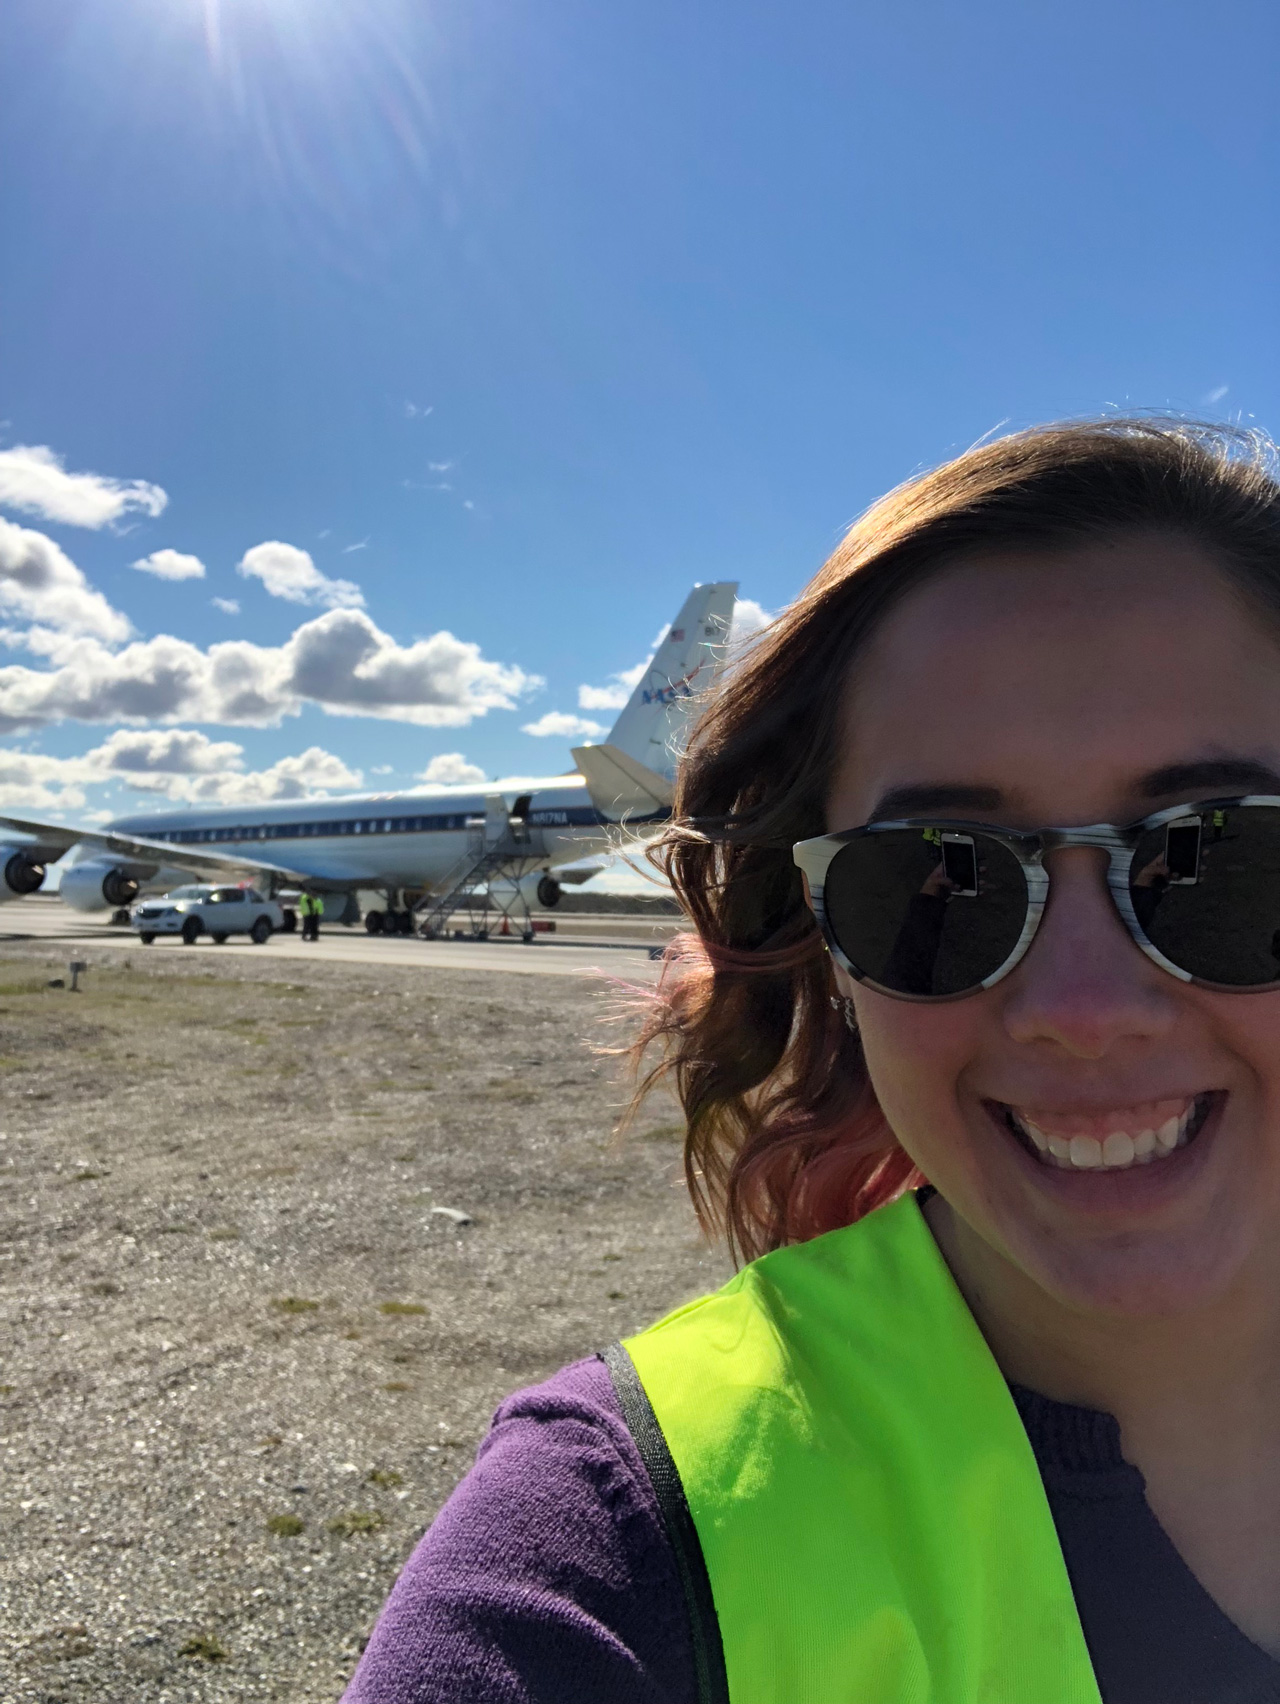 Woman smiling with NASA aircraft in the background.